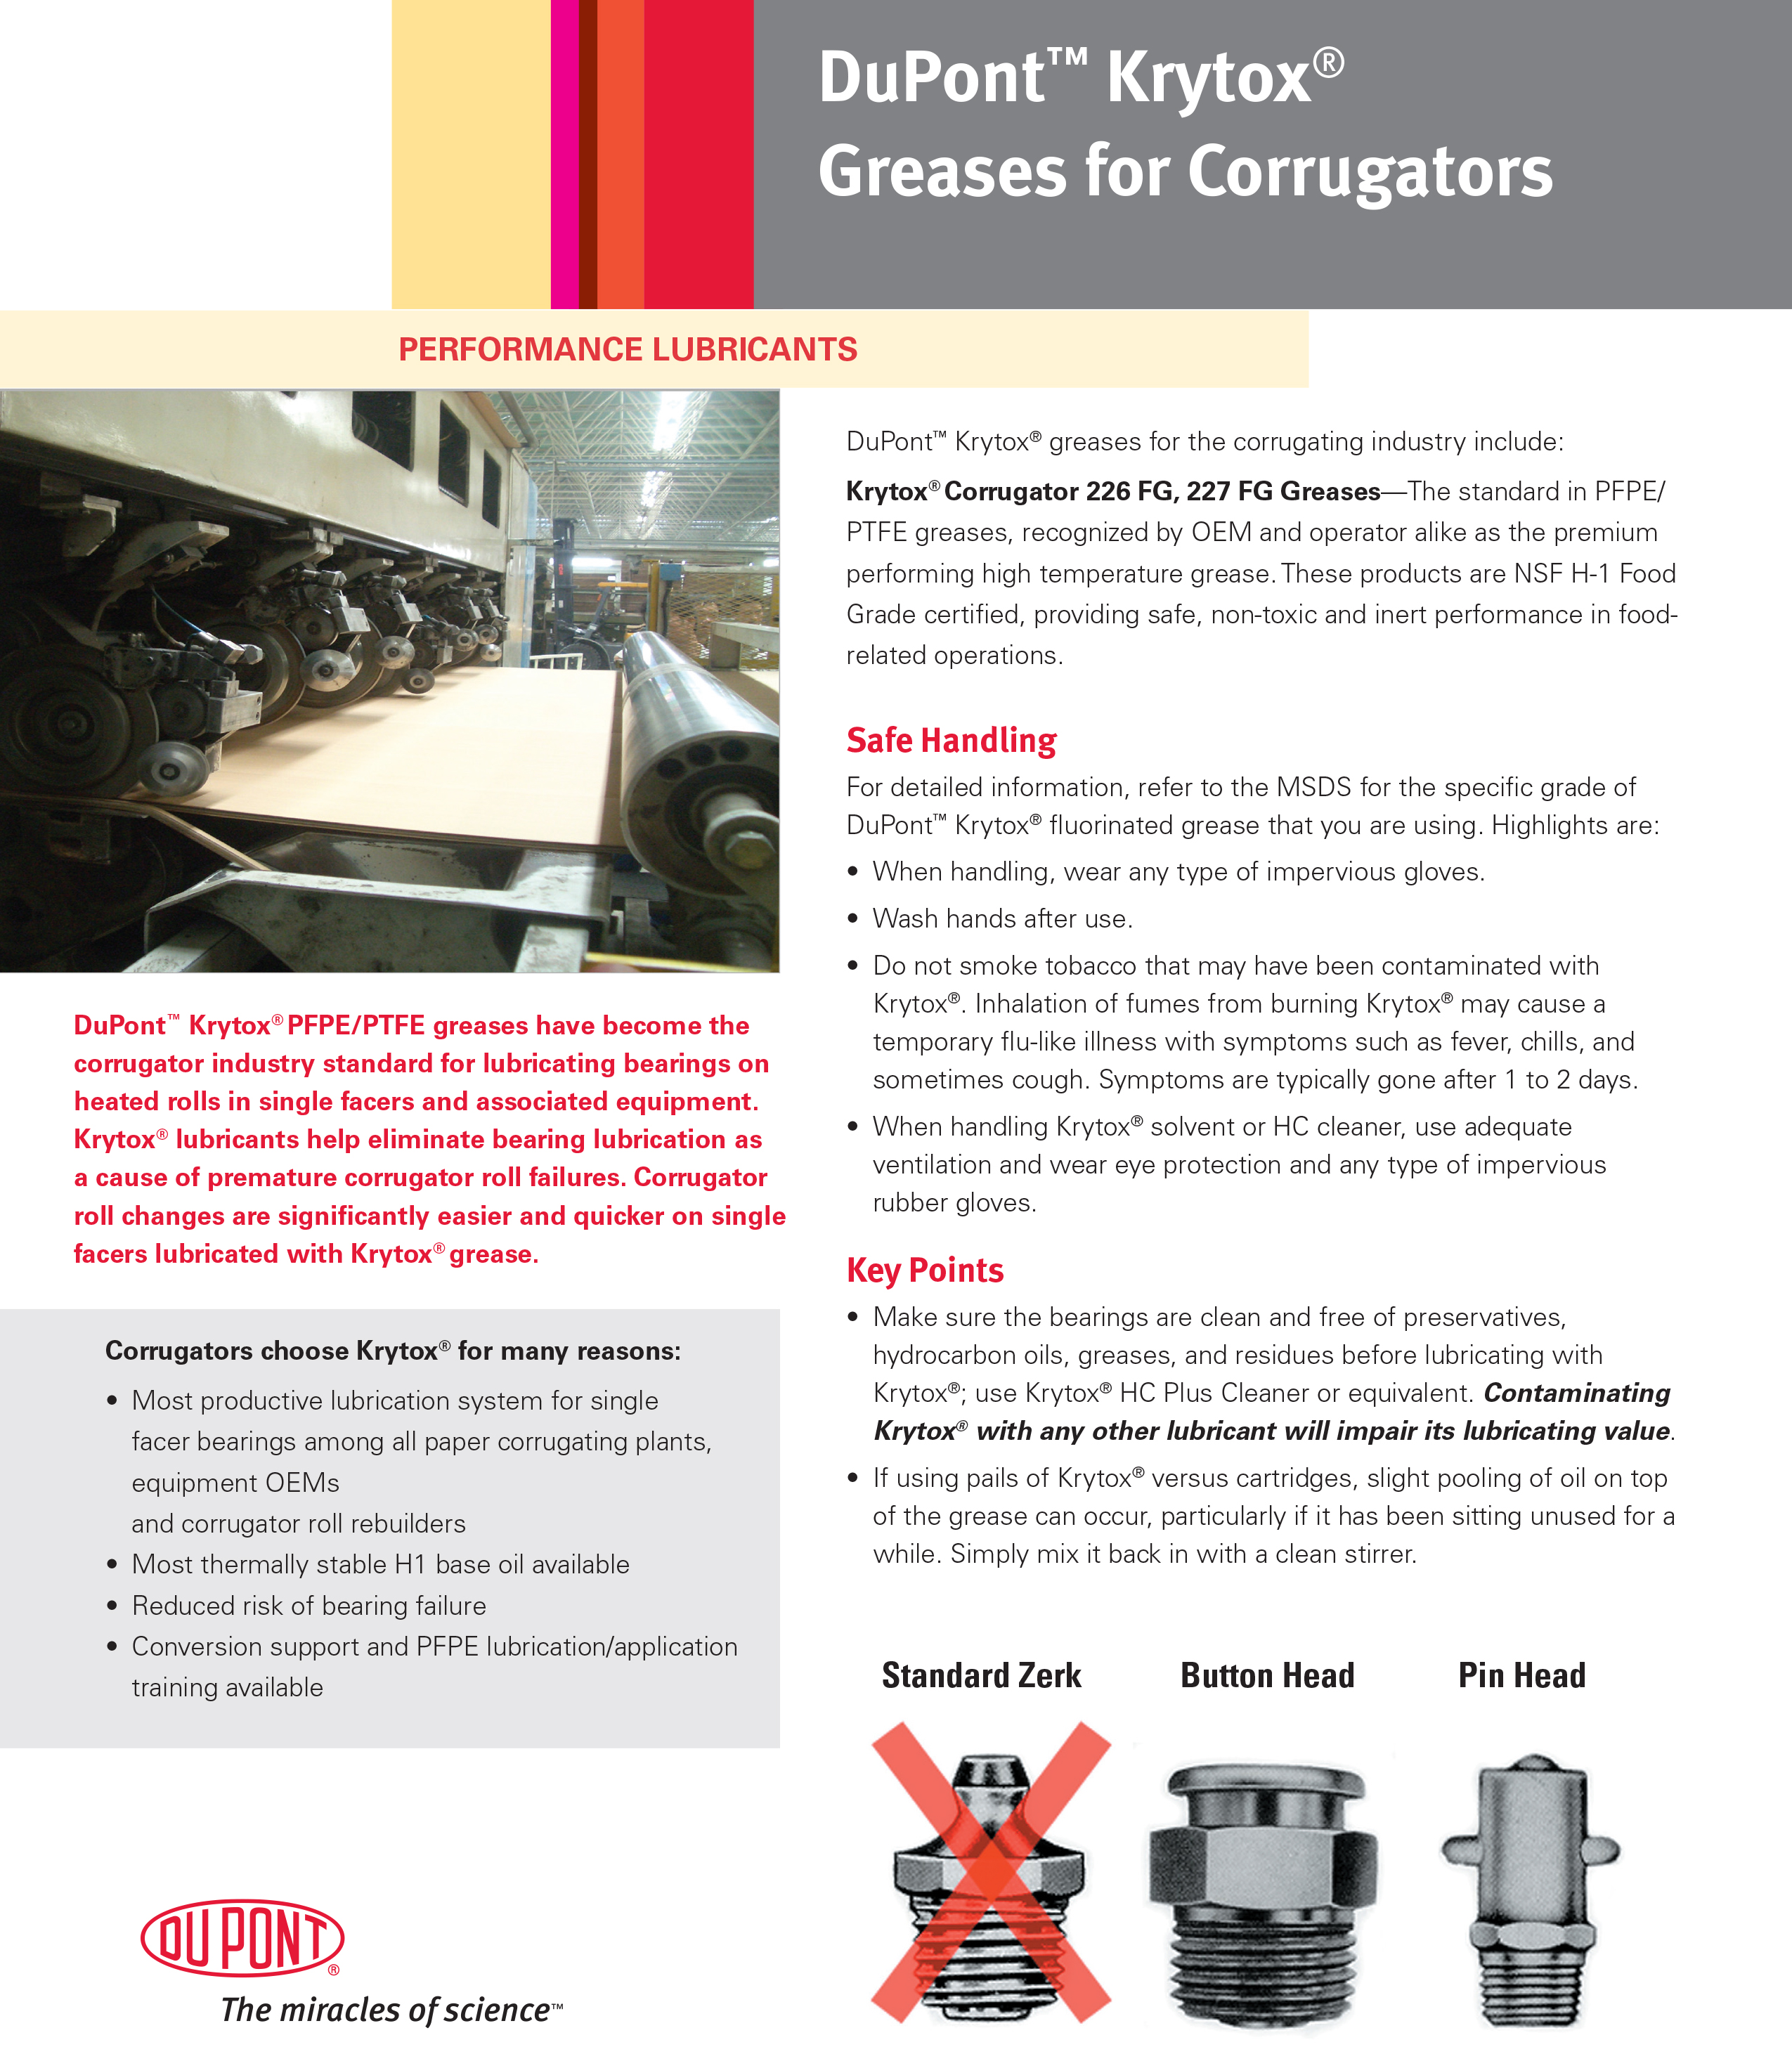 Learn more about DuPont™ Krytox® greases for corrugators in the Performance Lubricants brochure.